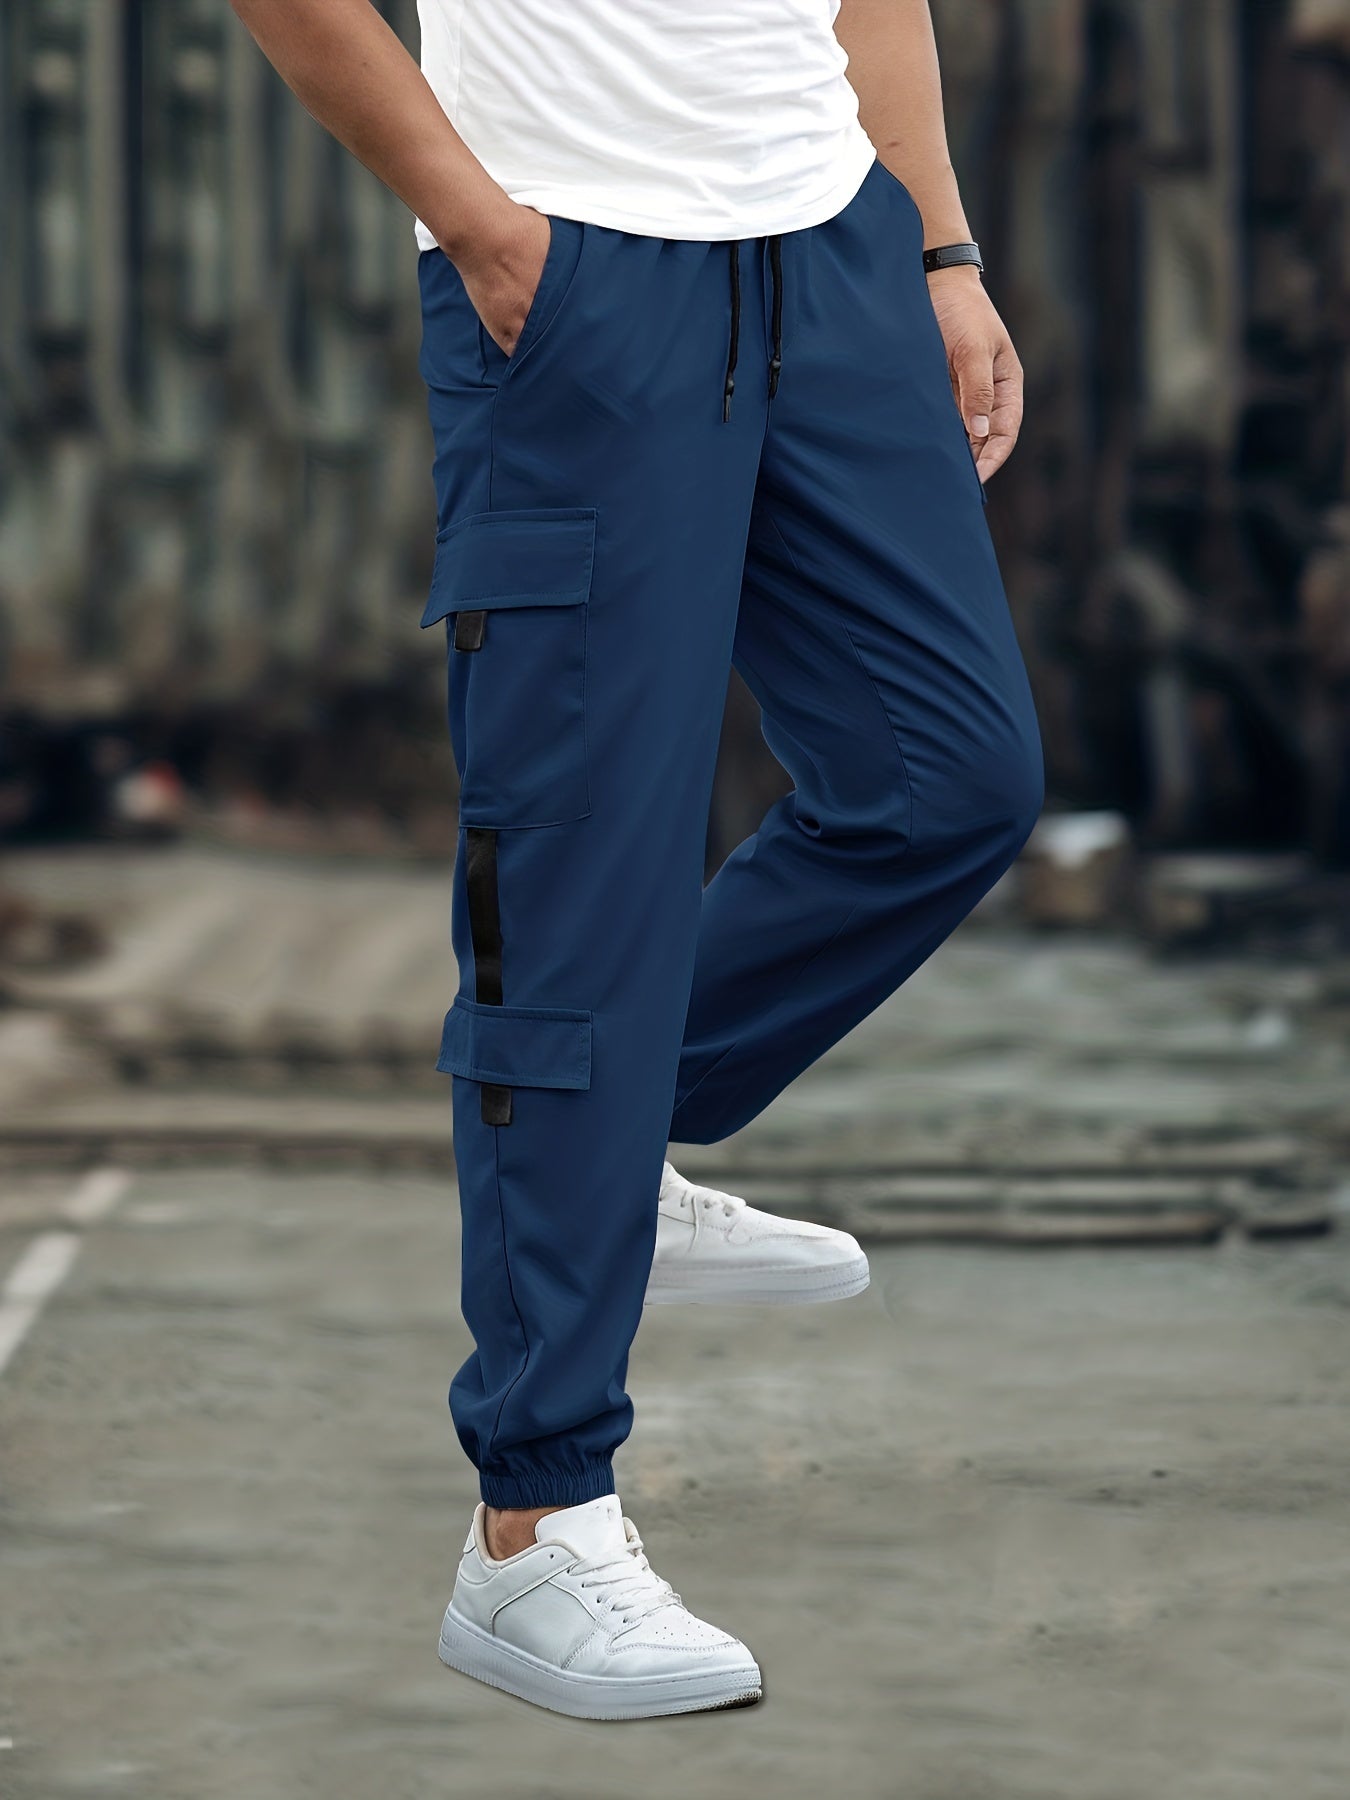 Multi Flap Pockets Cargo Pants, Men's Casual Loose Fit Drawstring Solid Color With Side Black Straps Design Cargo Pants Joggers For Spring Summer Outdoor